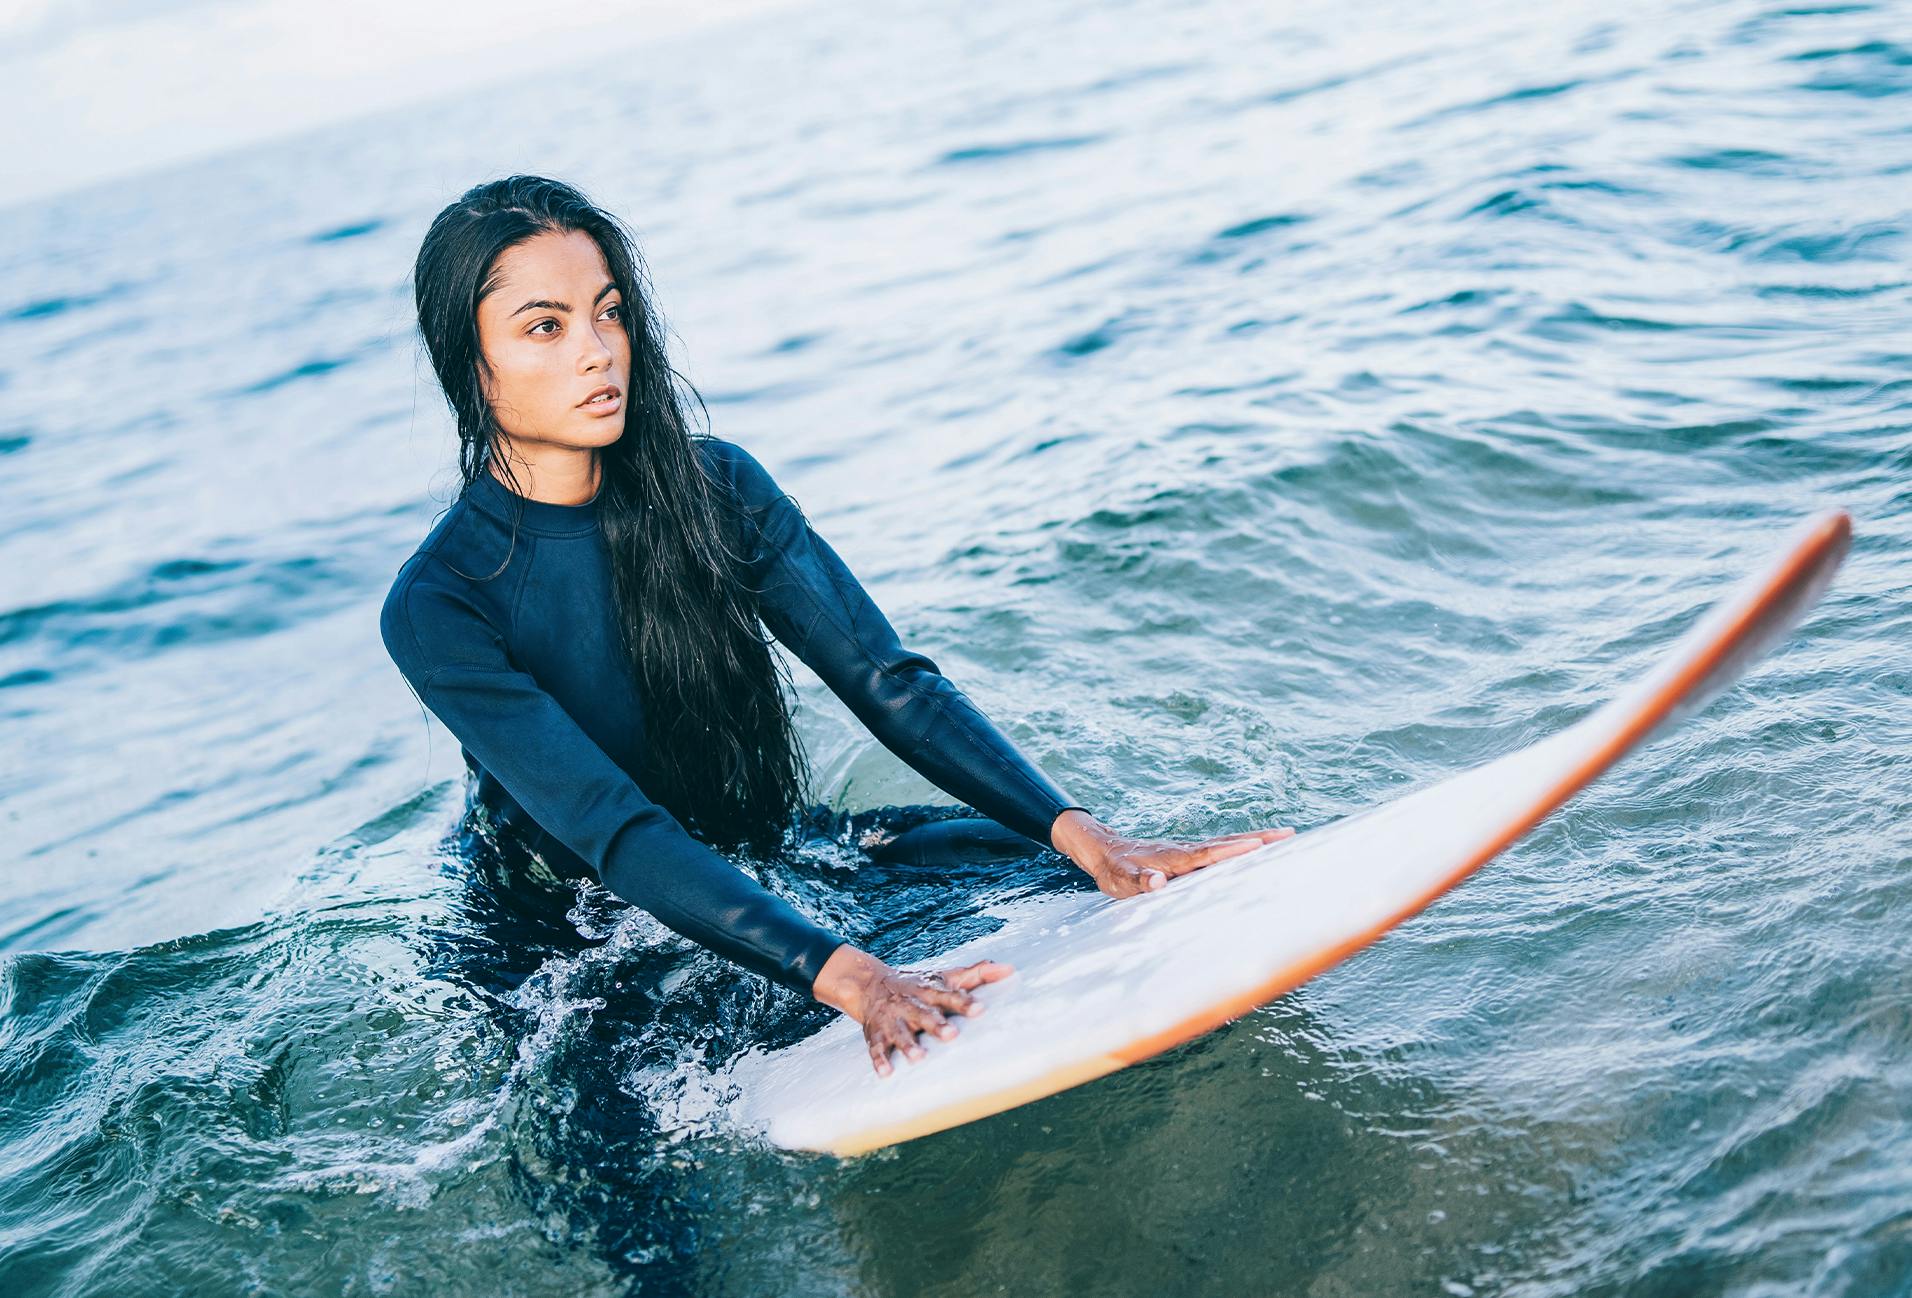 surfer in a wet suit sitting on a surfboard in the ocean